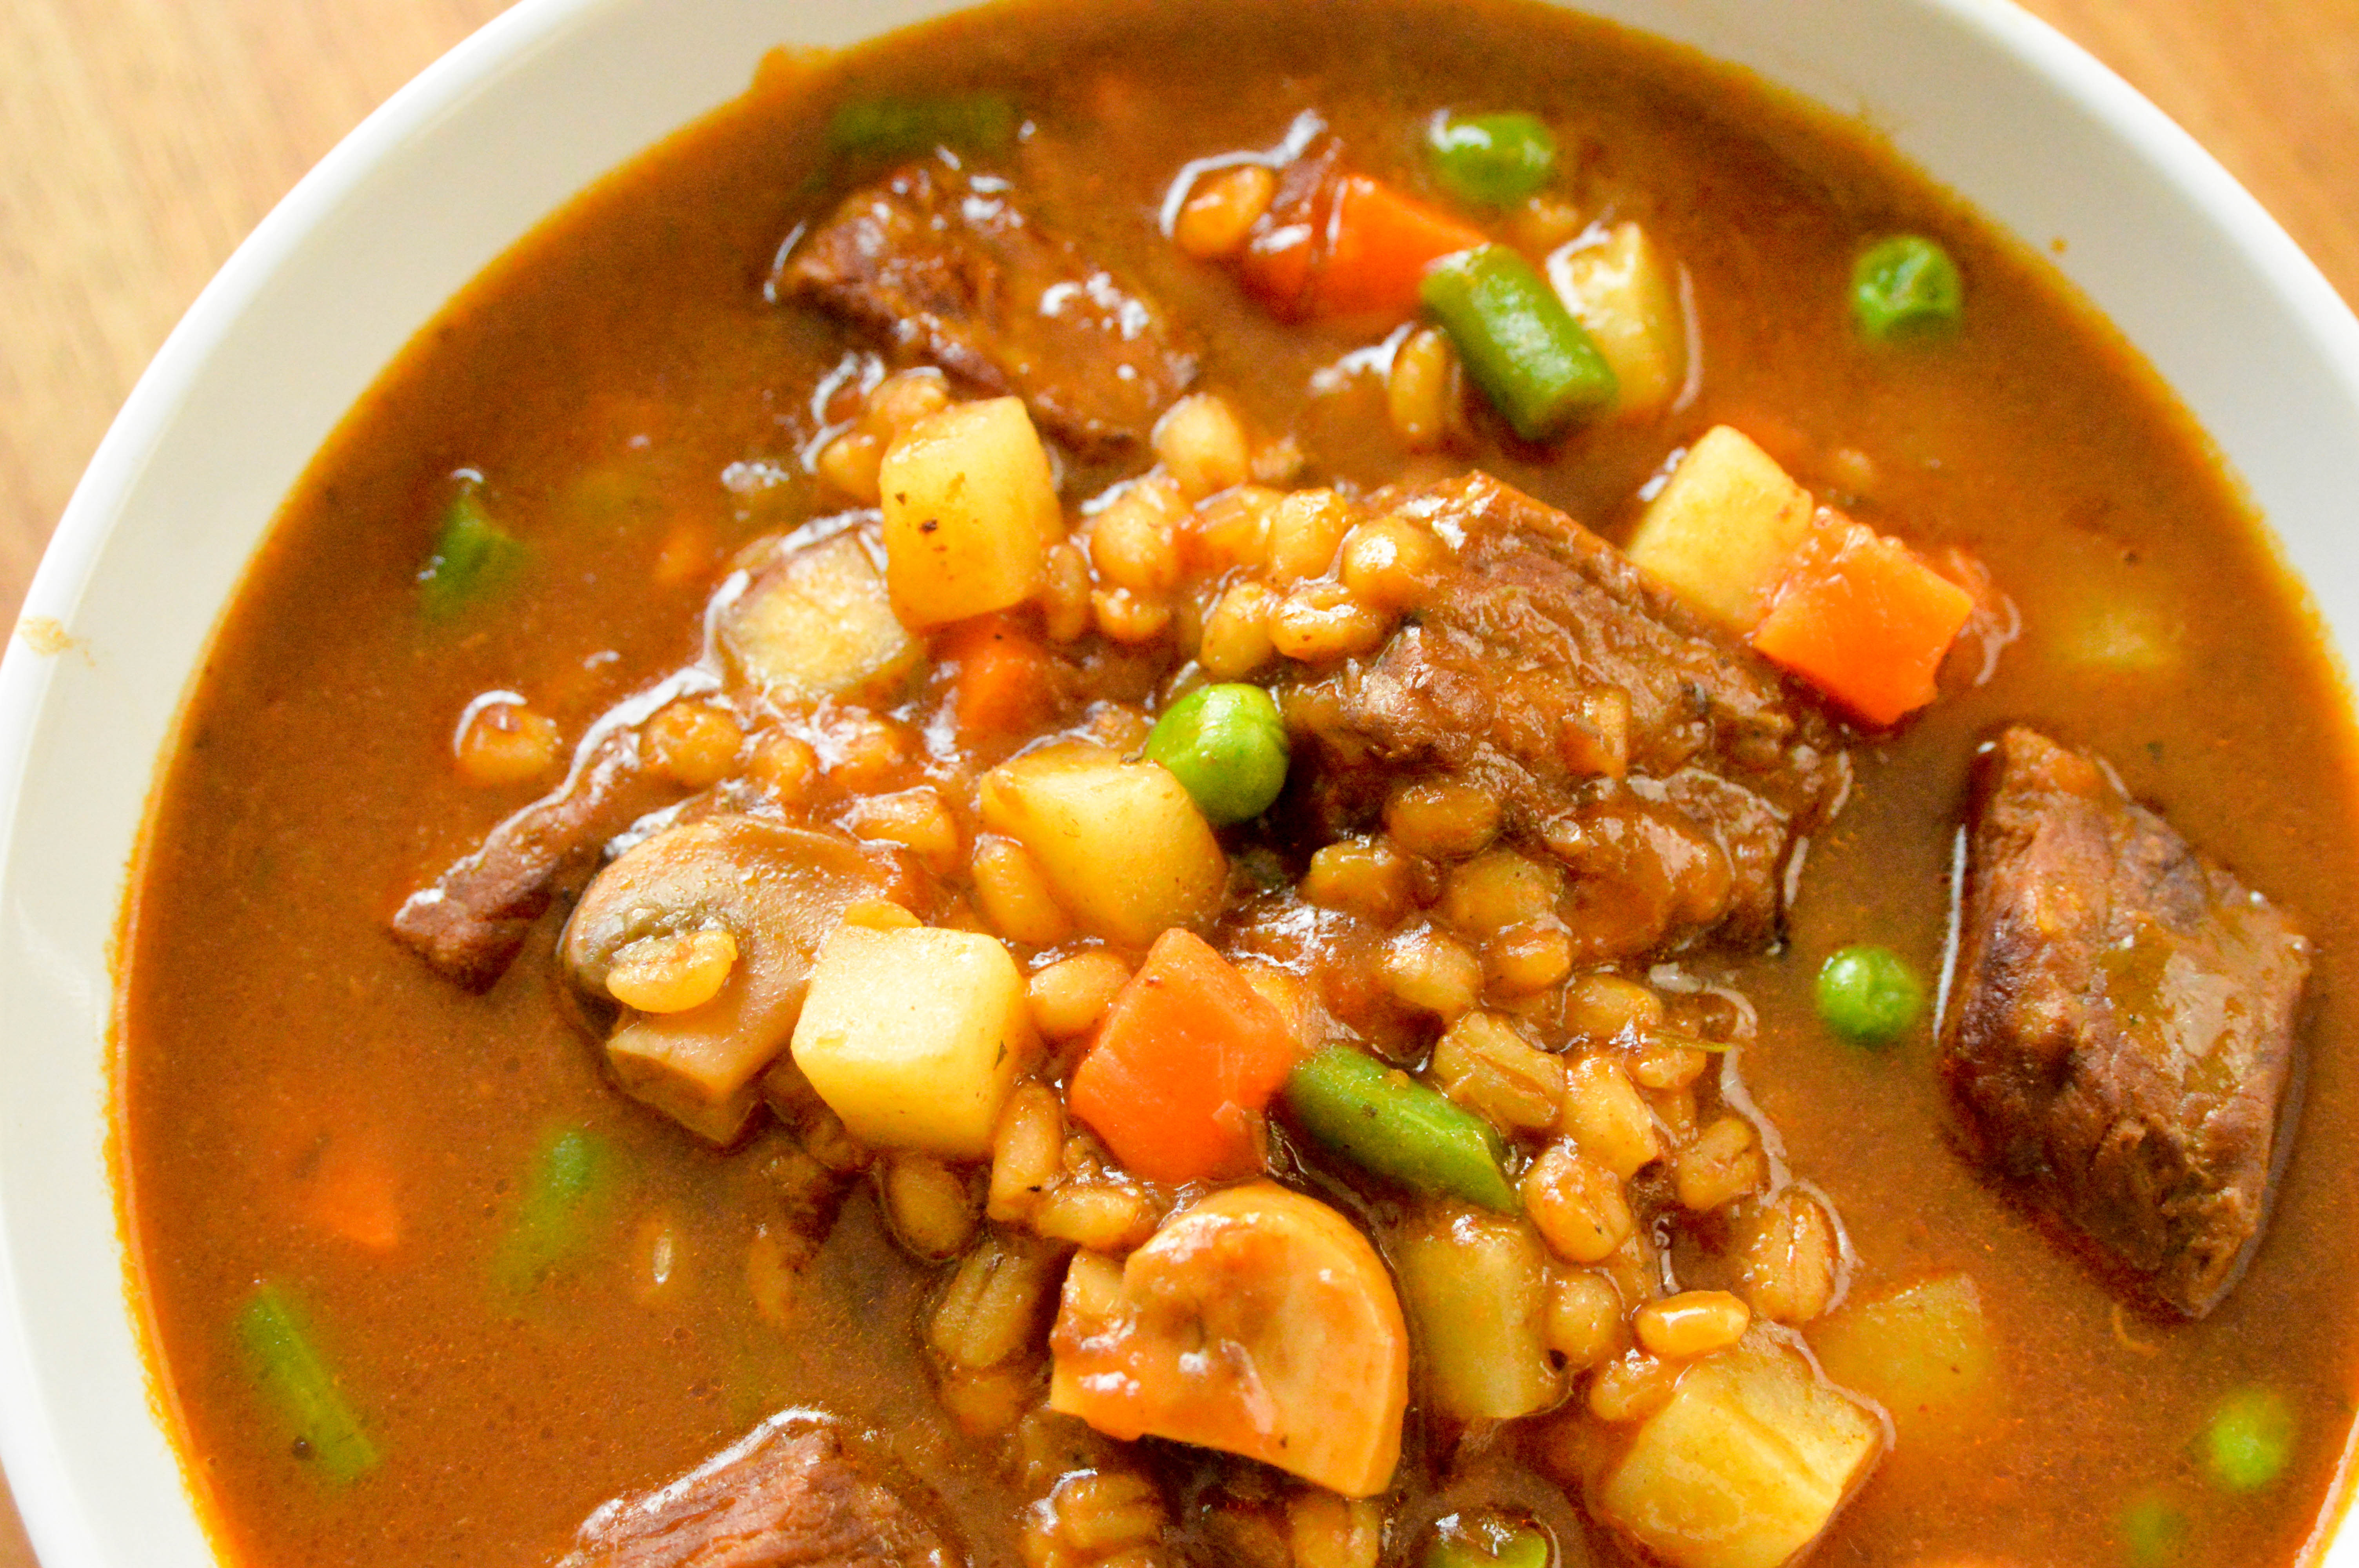 Beef and barley stew